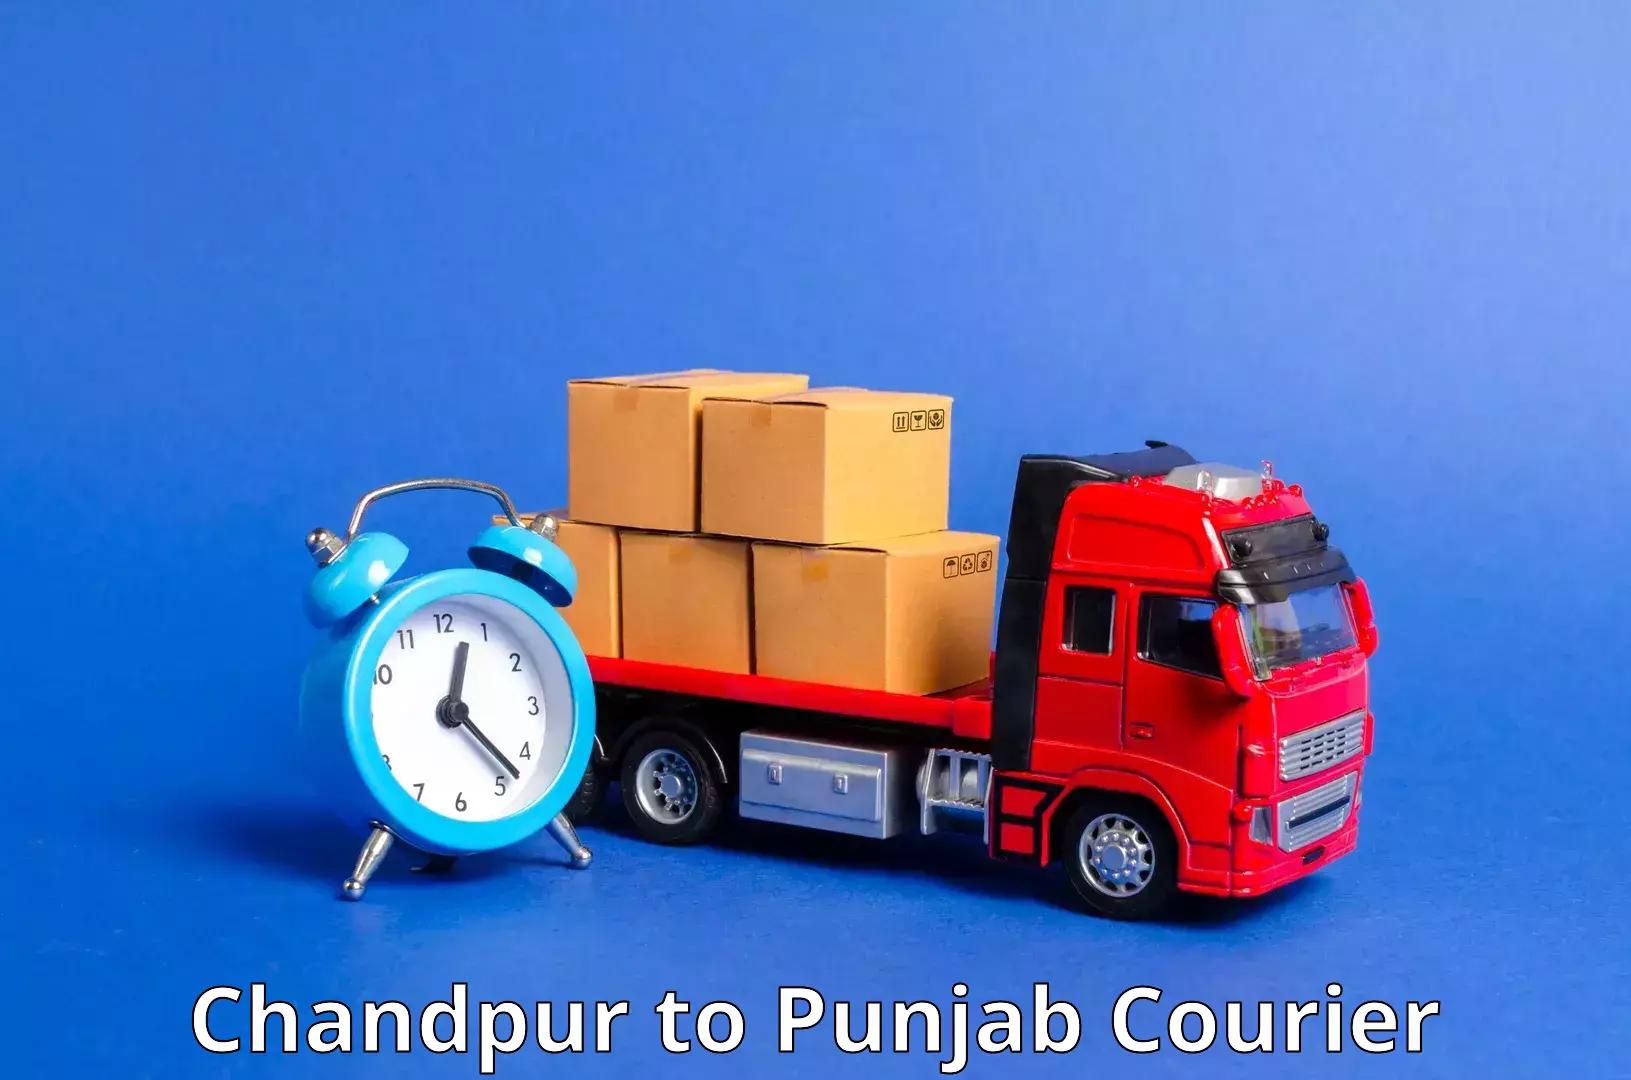 Automated parcel services Chandpur to Jalalabad